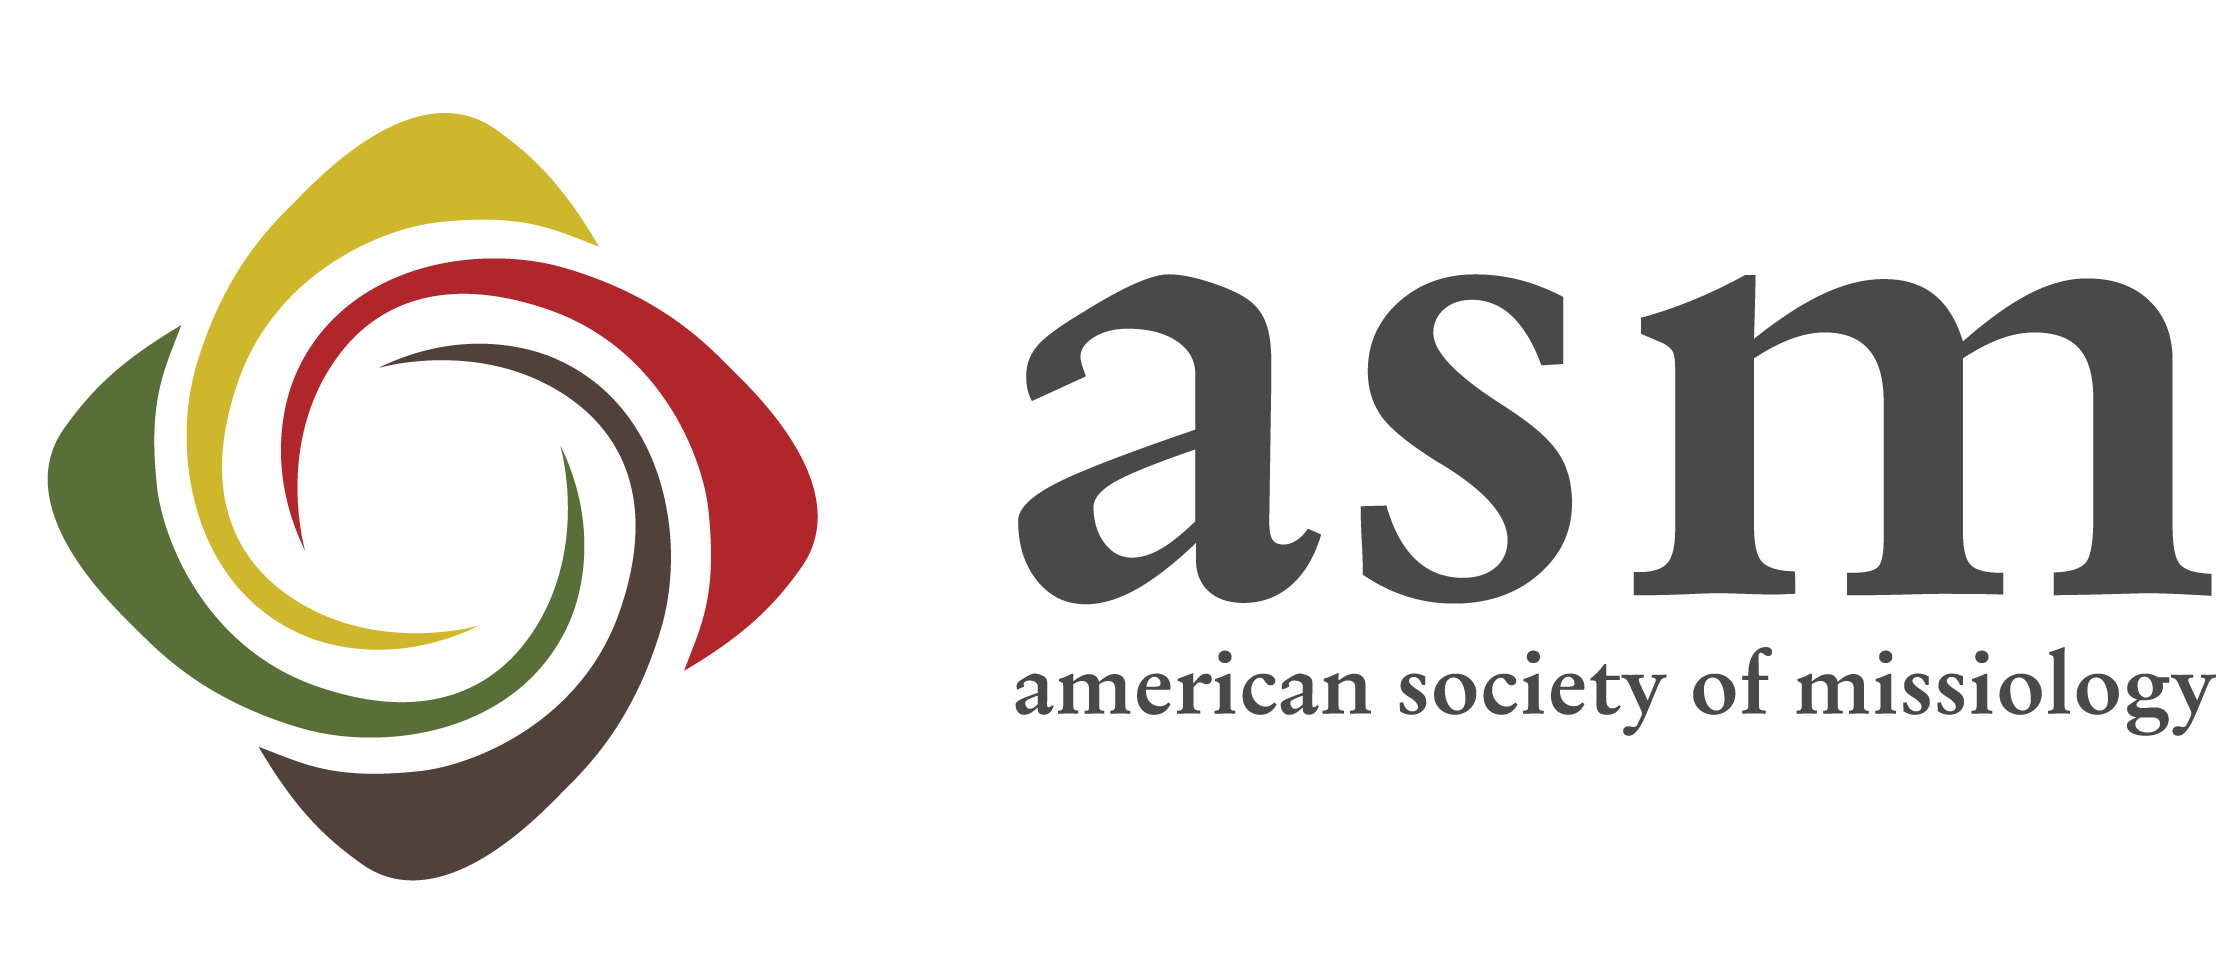 American Society of Missiology - ASM